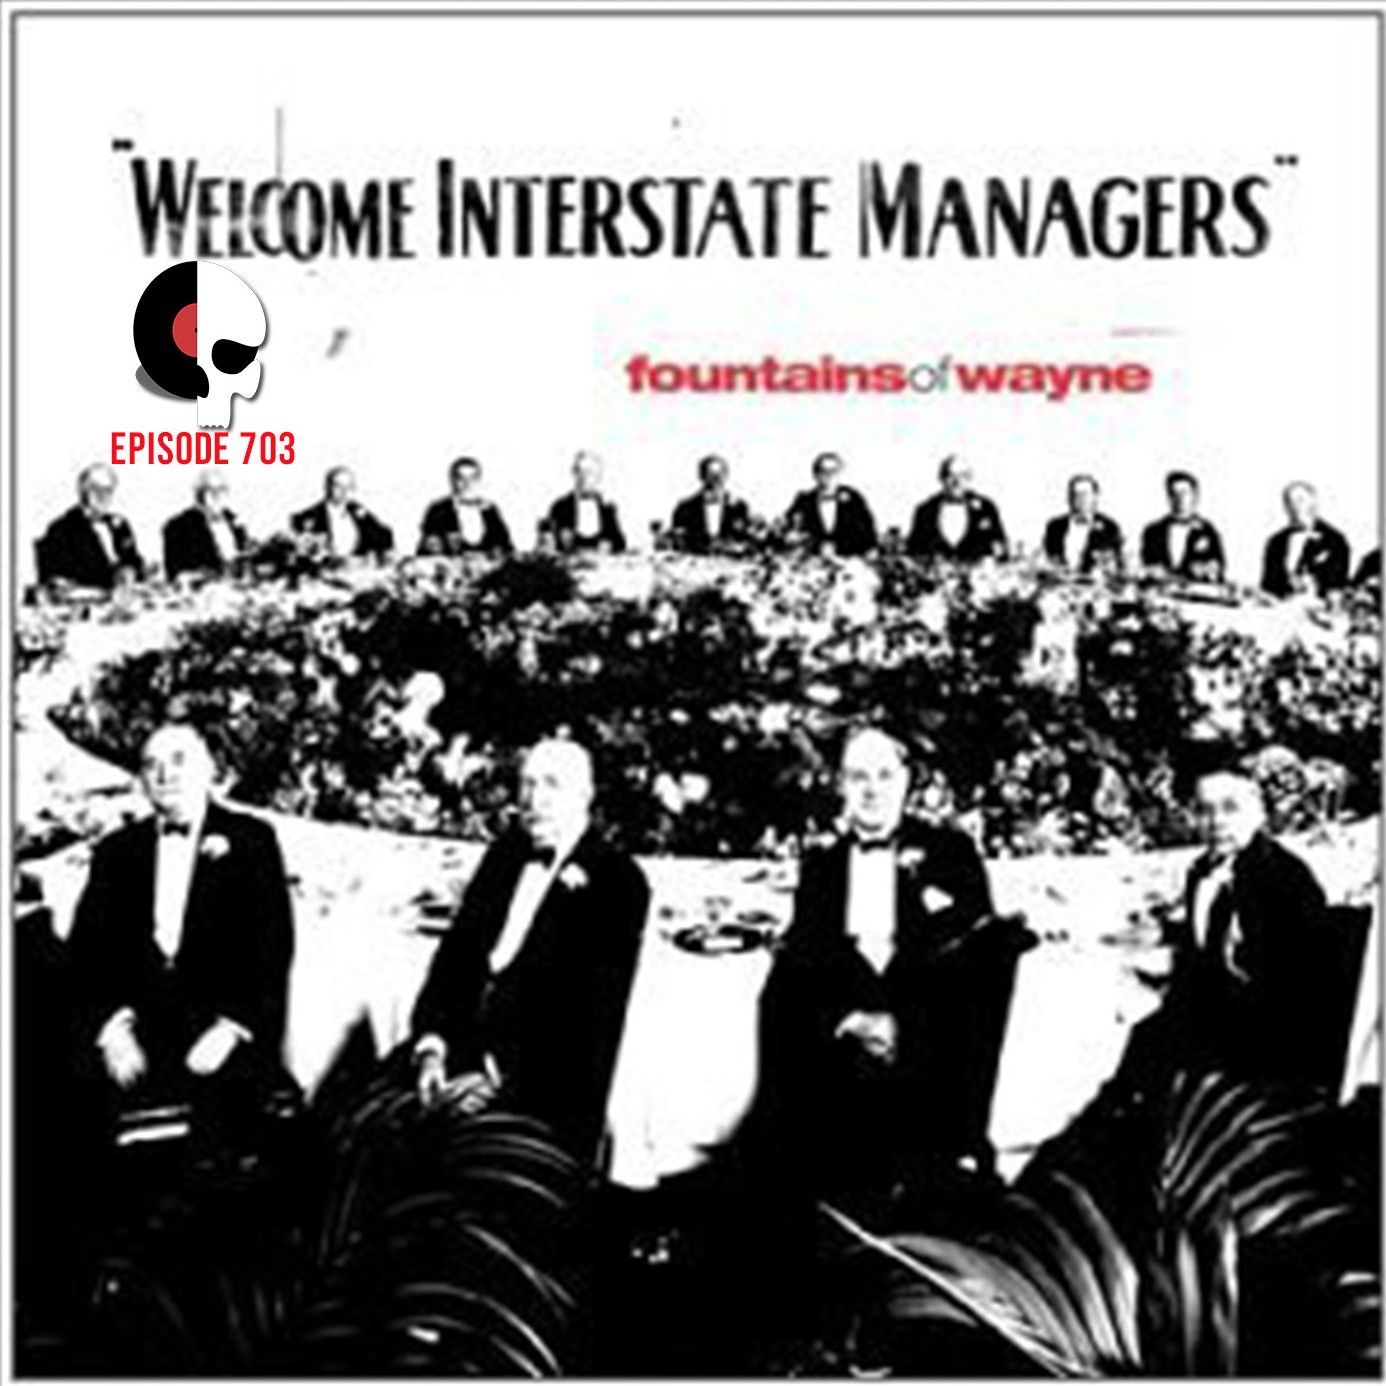 Episode 703 - S.W. Lauden and Nadja Dee talk Fountains of Wayne & Welcome Interstate Managers as an enduring testament to the essence of everyday life.